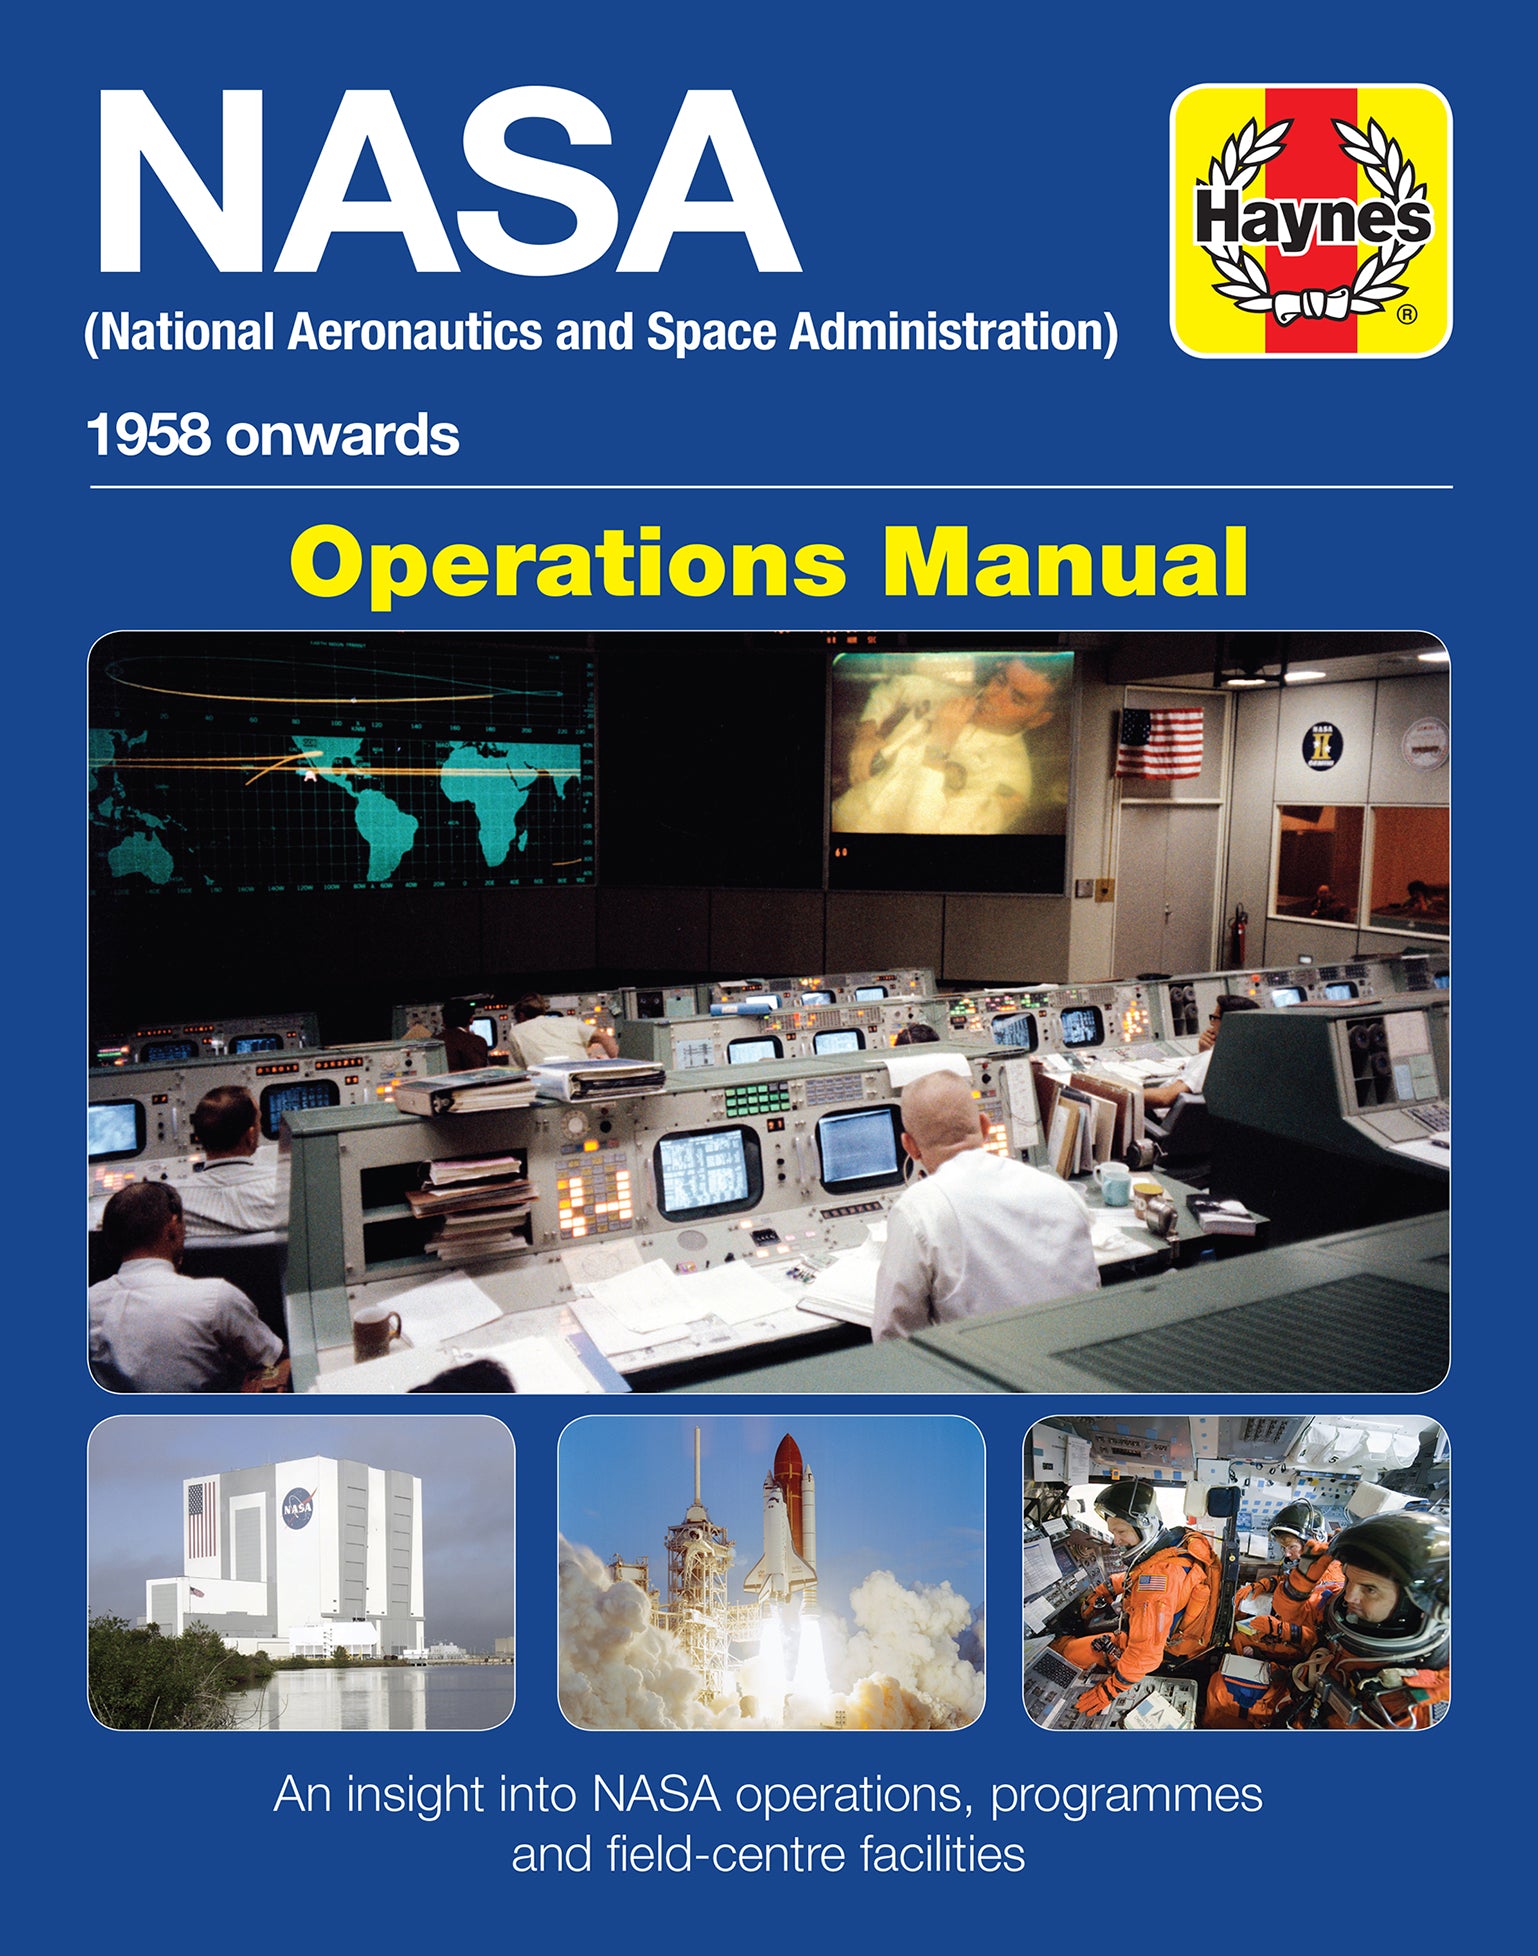 NASA 1958 Onwards Operation Manual by Haynes, sold by In-Excess